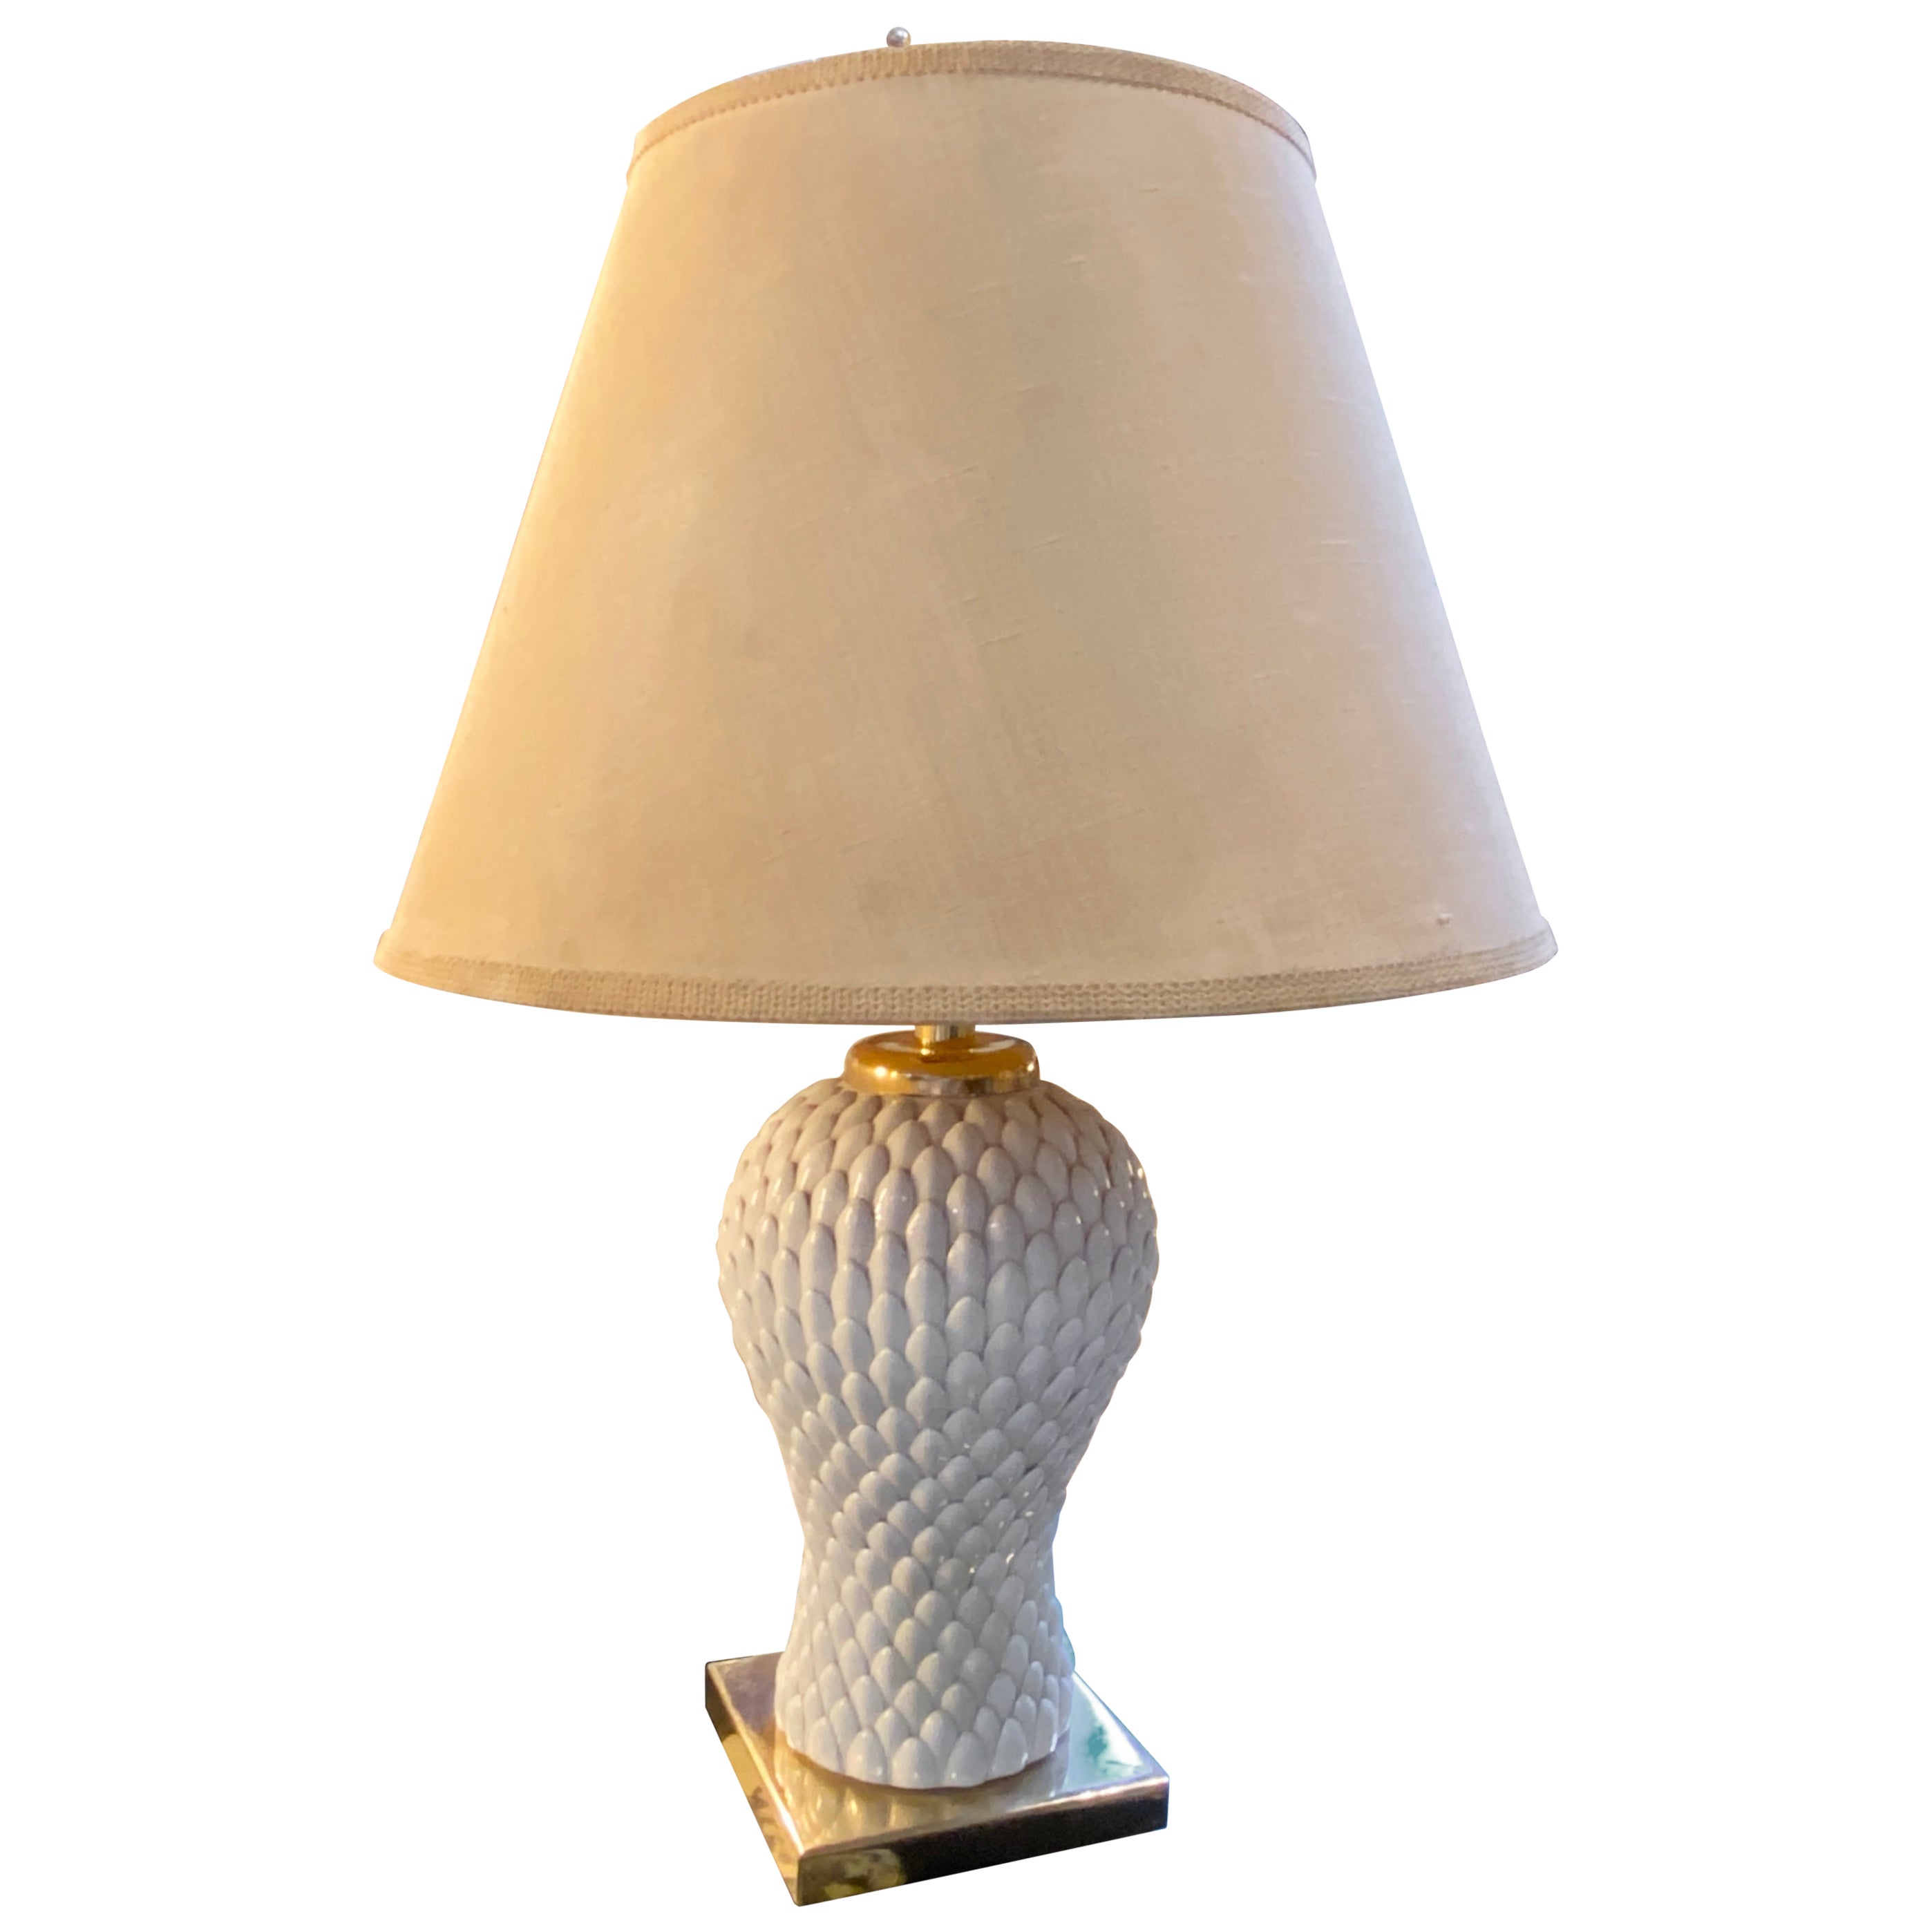 1980s Hollywood Regency  Brass and White Porcelain Italian Table Lamp For Sale